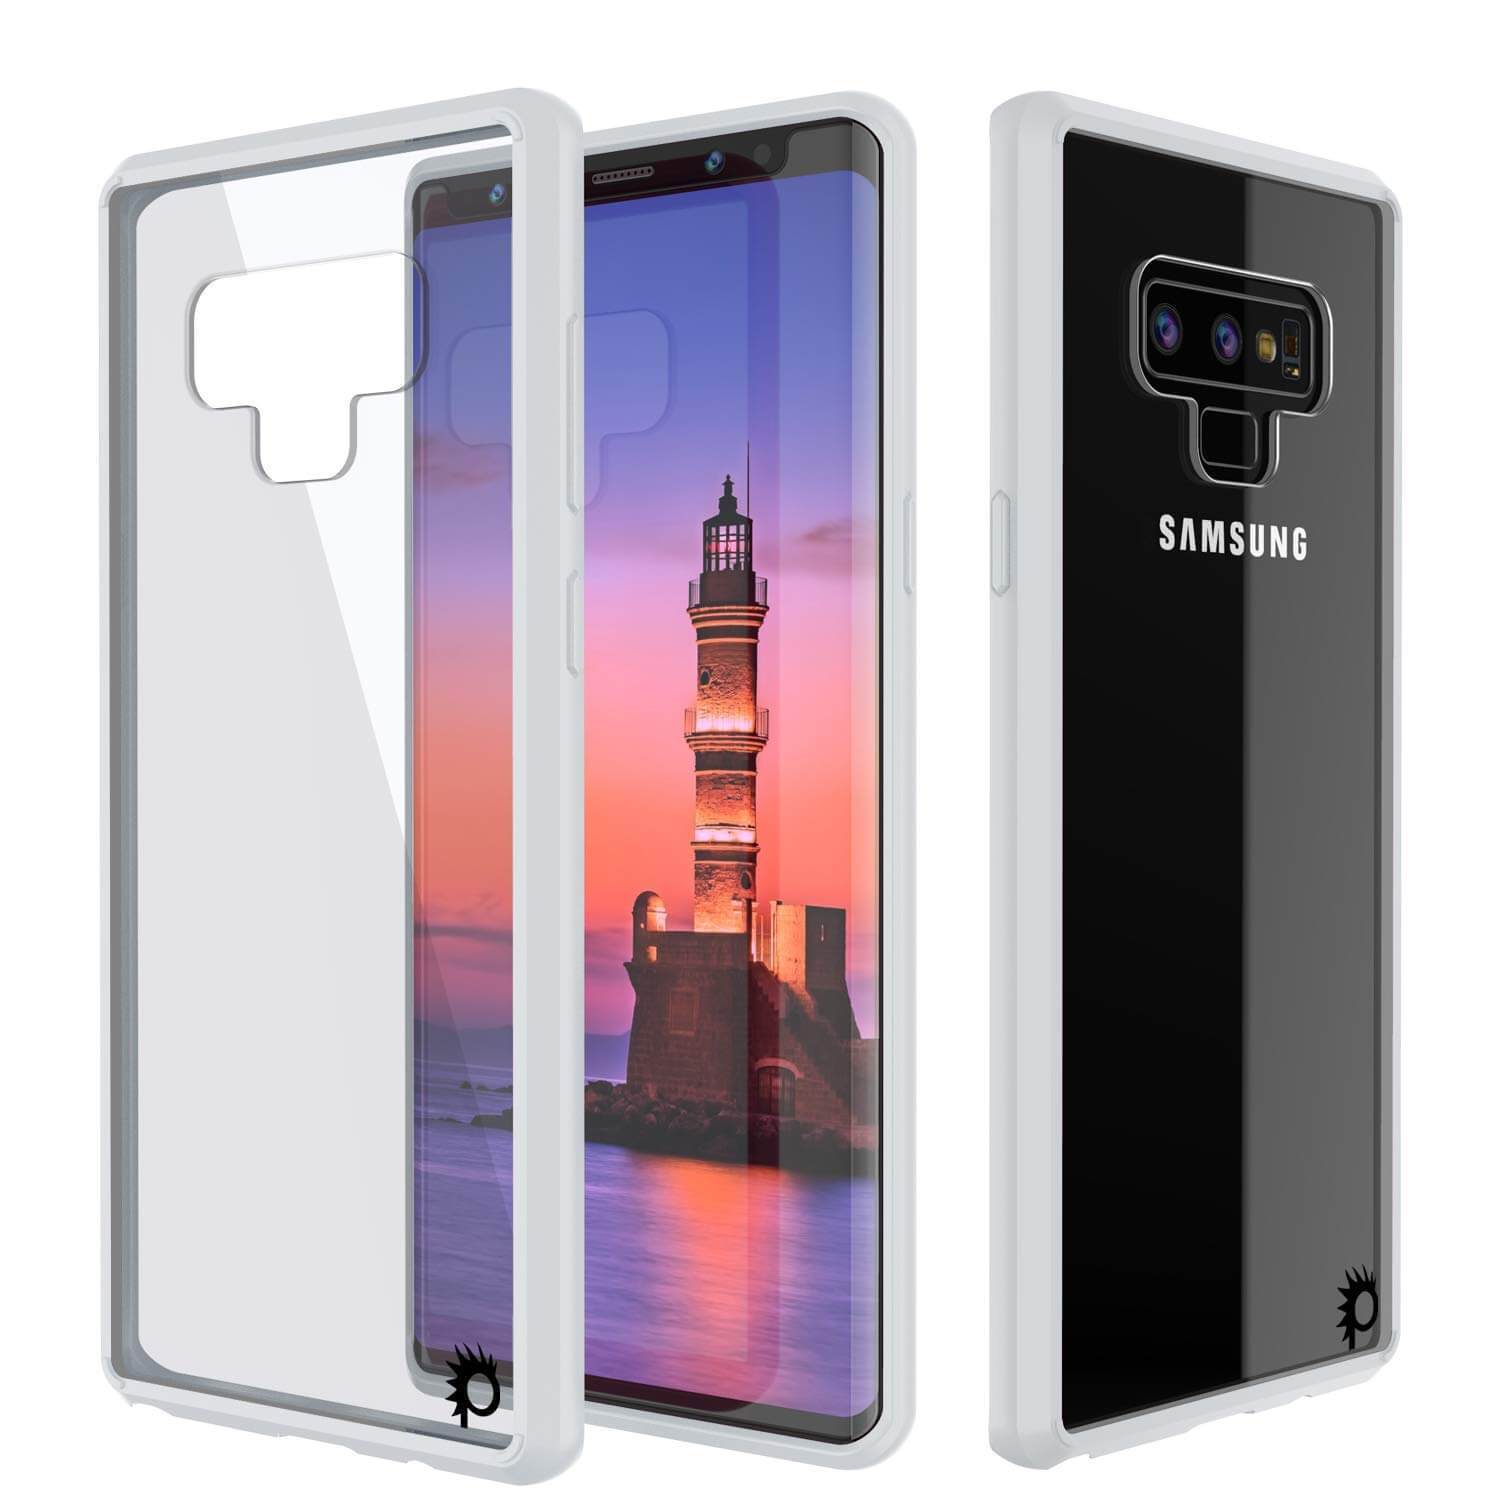 Galaxy Note 10+ Plus Punkcase Lucid-2.0 Series Slim Fit Armor White Case Cover